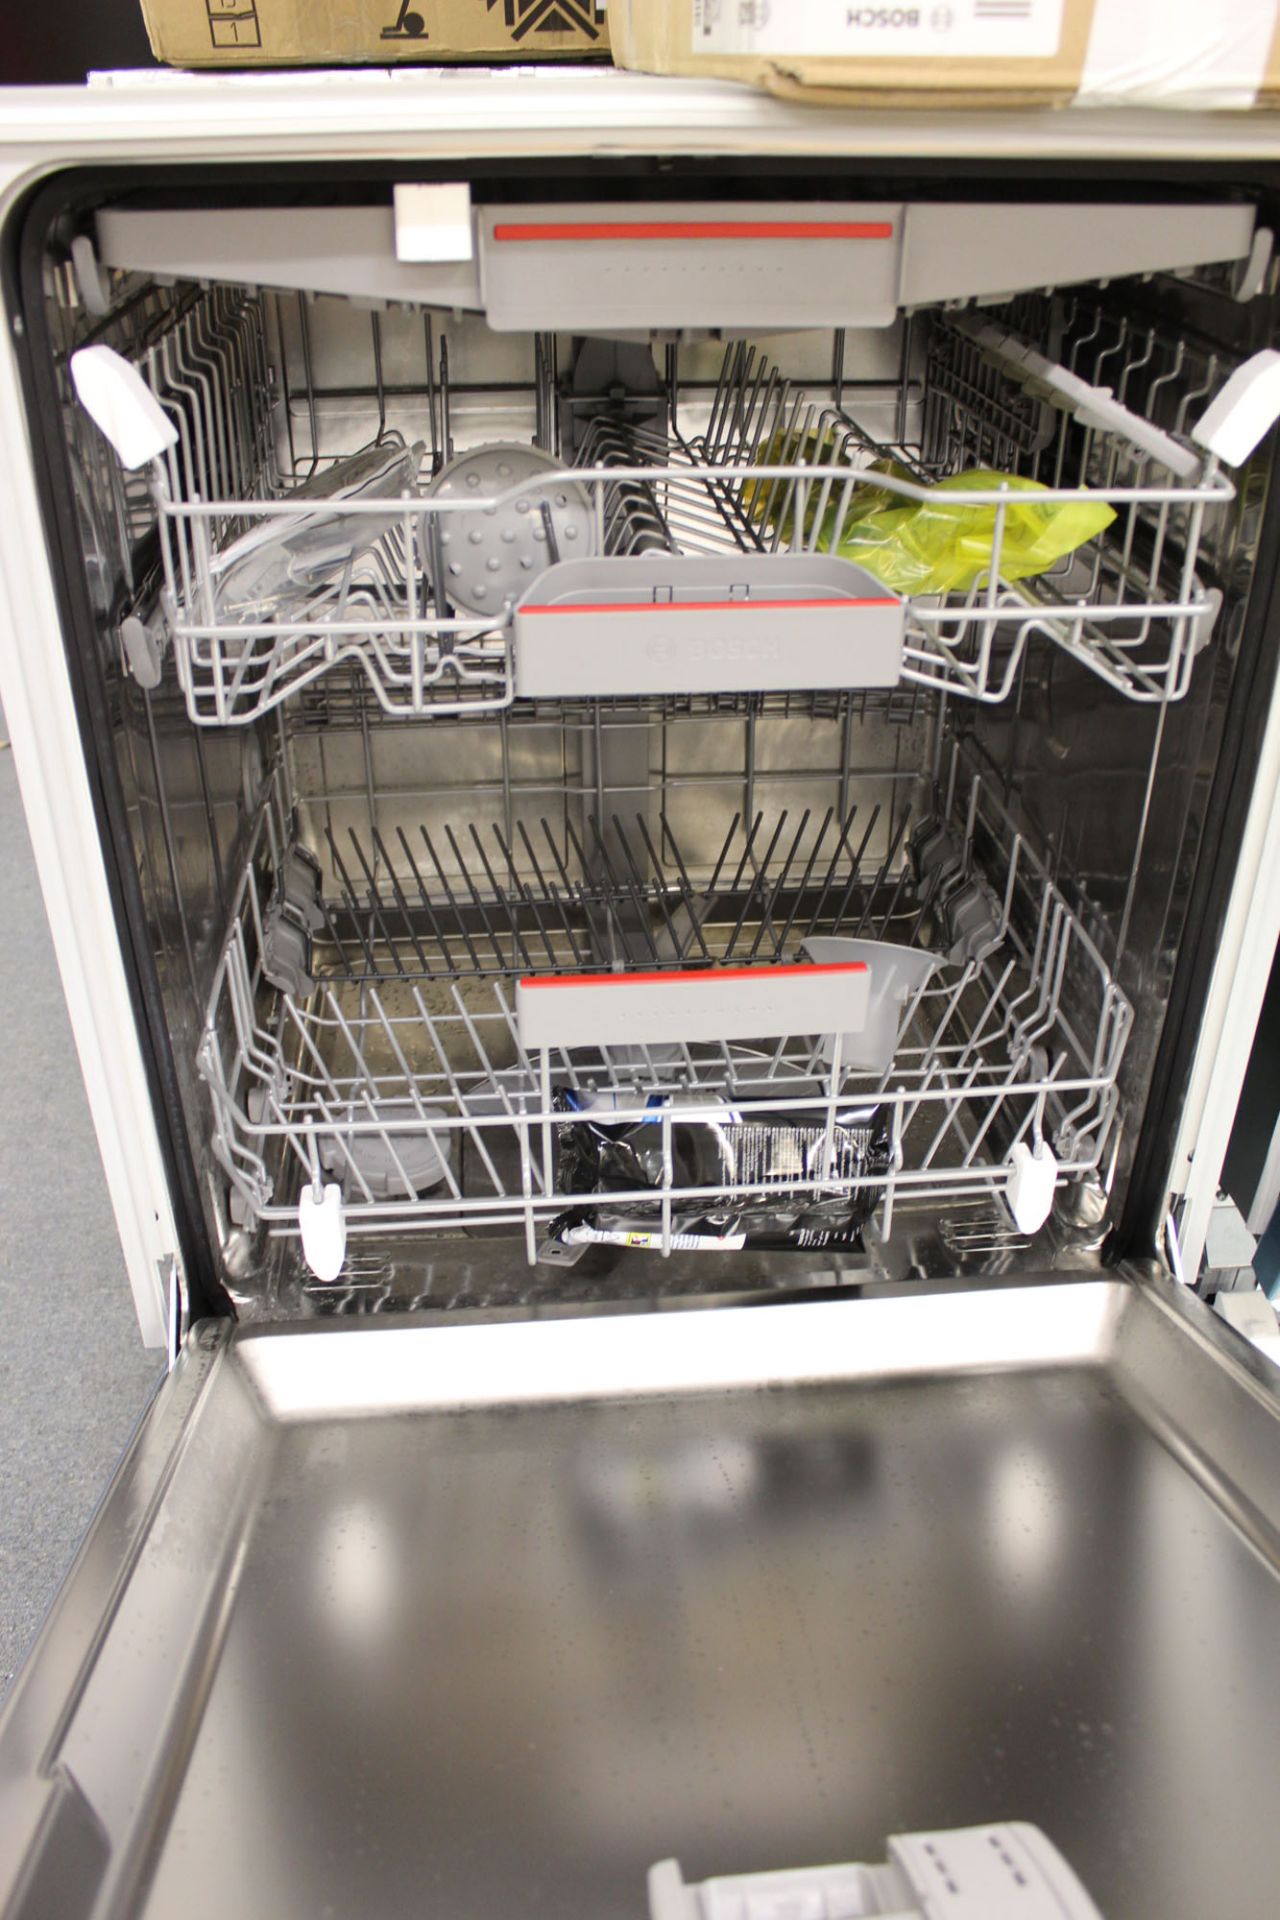 SMV46NX00GB Bosch Dishwasher fully integrated - Image 2 of 2